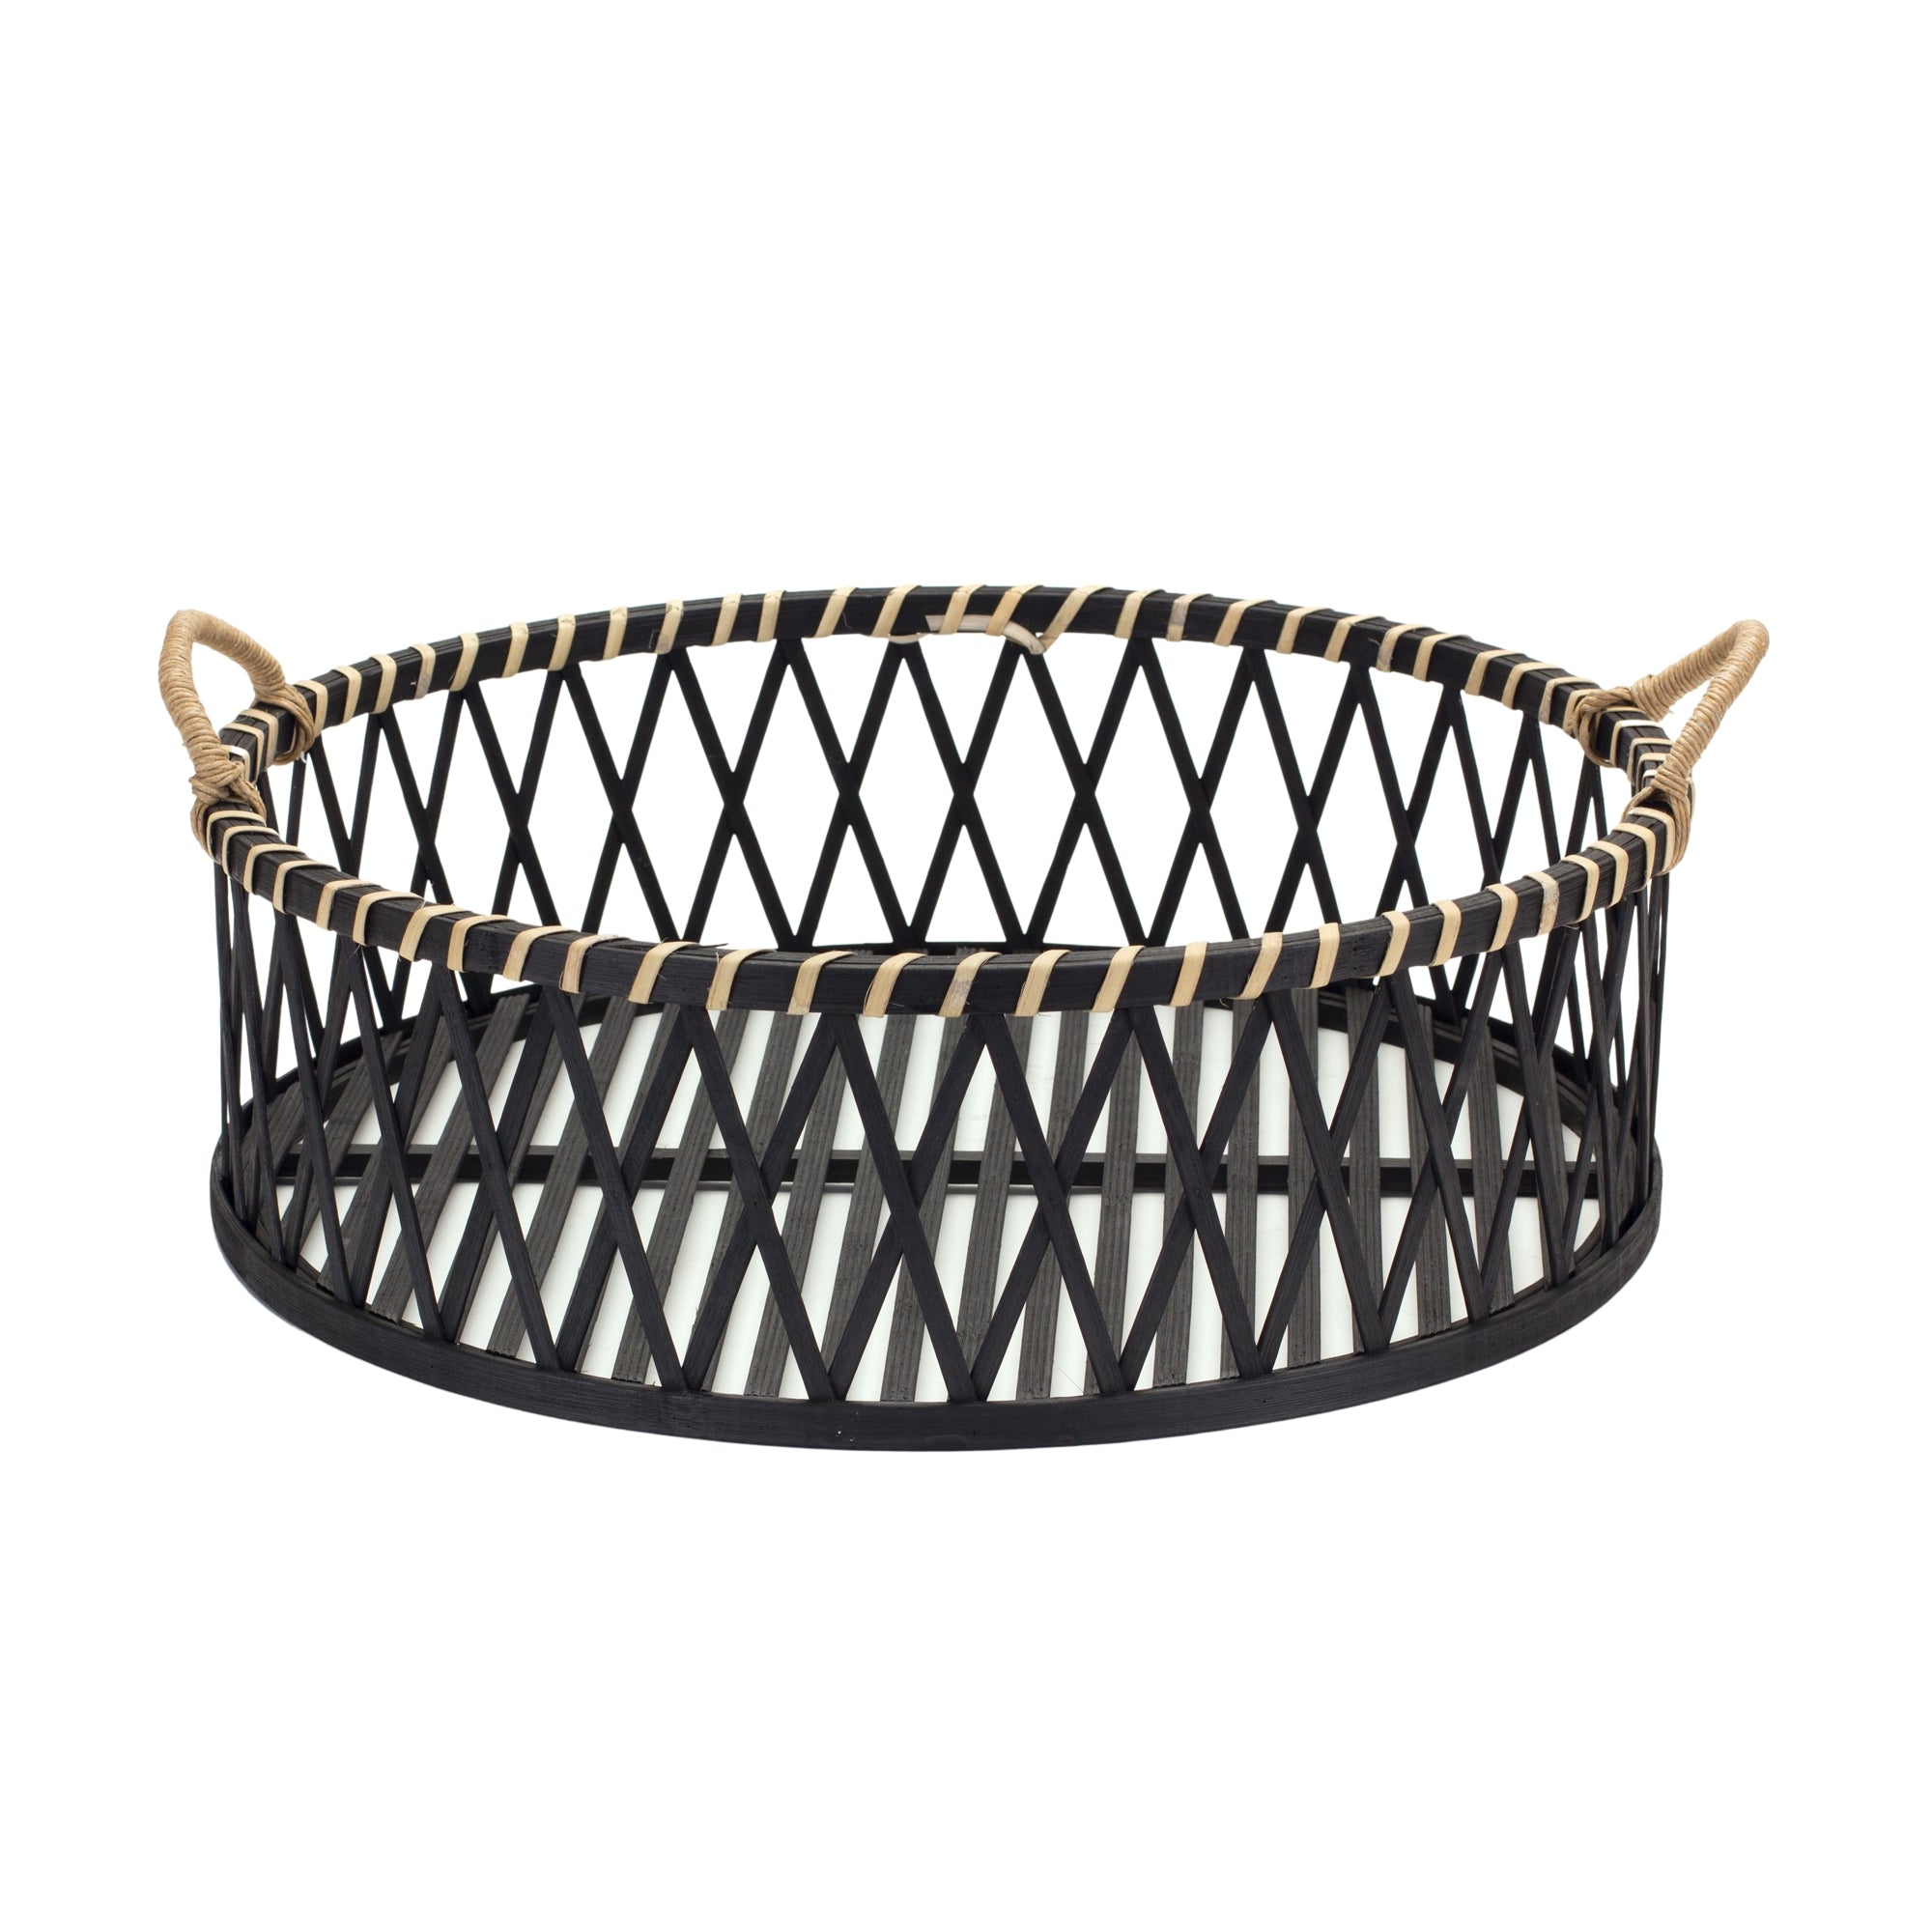 Round Woven Bamboo Trays with Rattan Handle Accent, Set of 2 - Decorative Trays